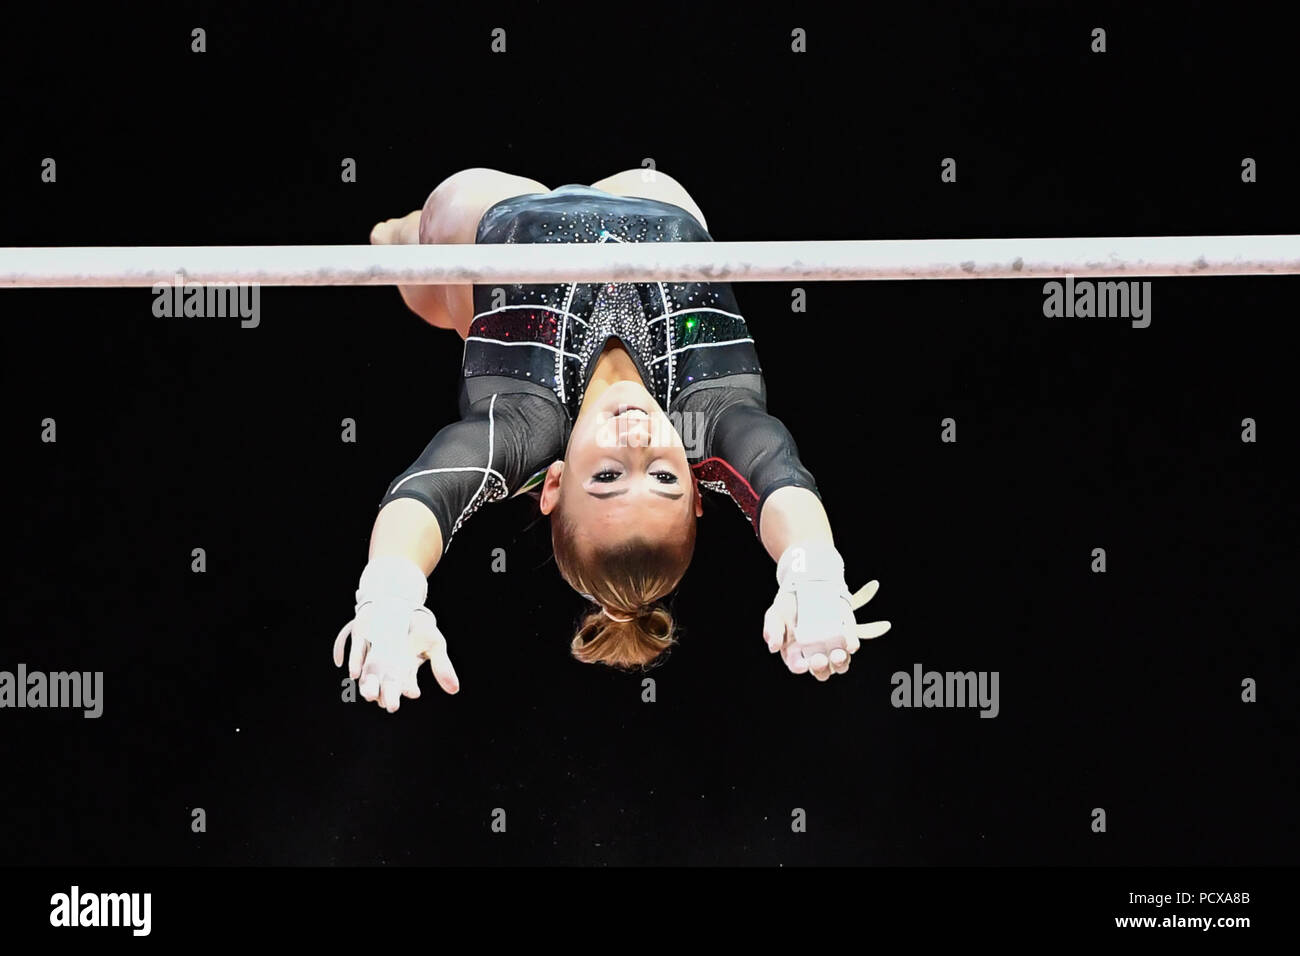 Glasgow, UK, 4 Aug 2018. LINARI Noemi Francesca (ITA) competes on Uneven Bars in Women's Artistic Gymnastics Team Final during the European Championships Glasgow 2018 at The SSE Hydro on Saturday, 04 August 2018. GLASGOW SCOTLAND . Credit: Taka G Wu Credit: Taka Wu/Alamy Live News Stock Photo